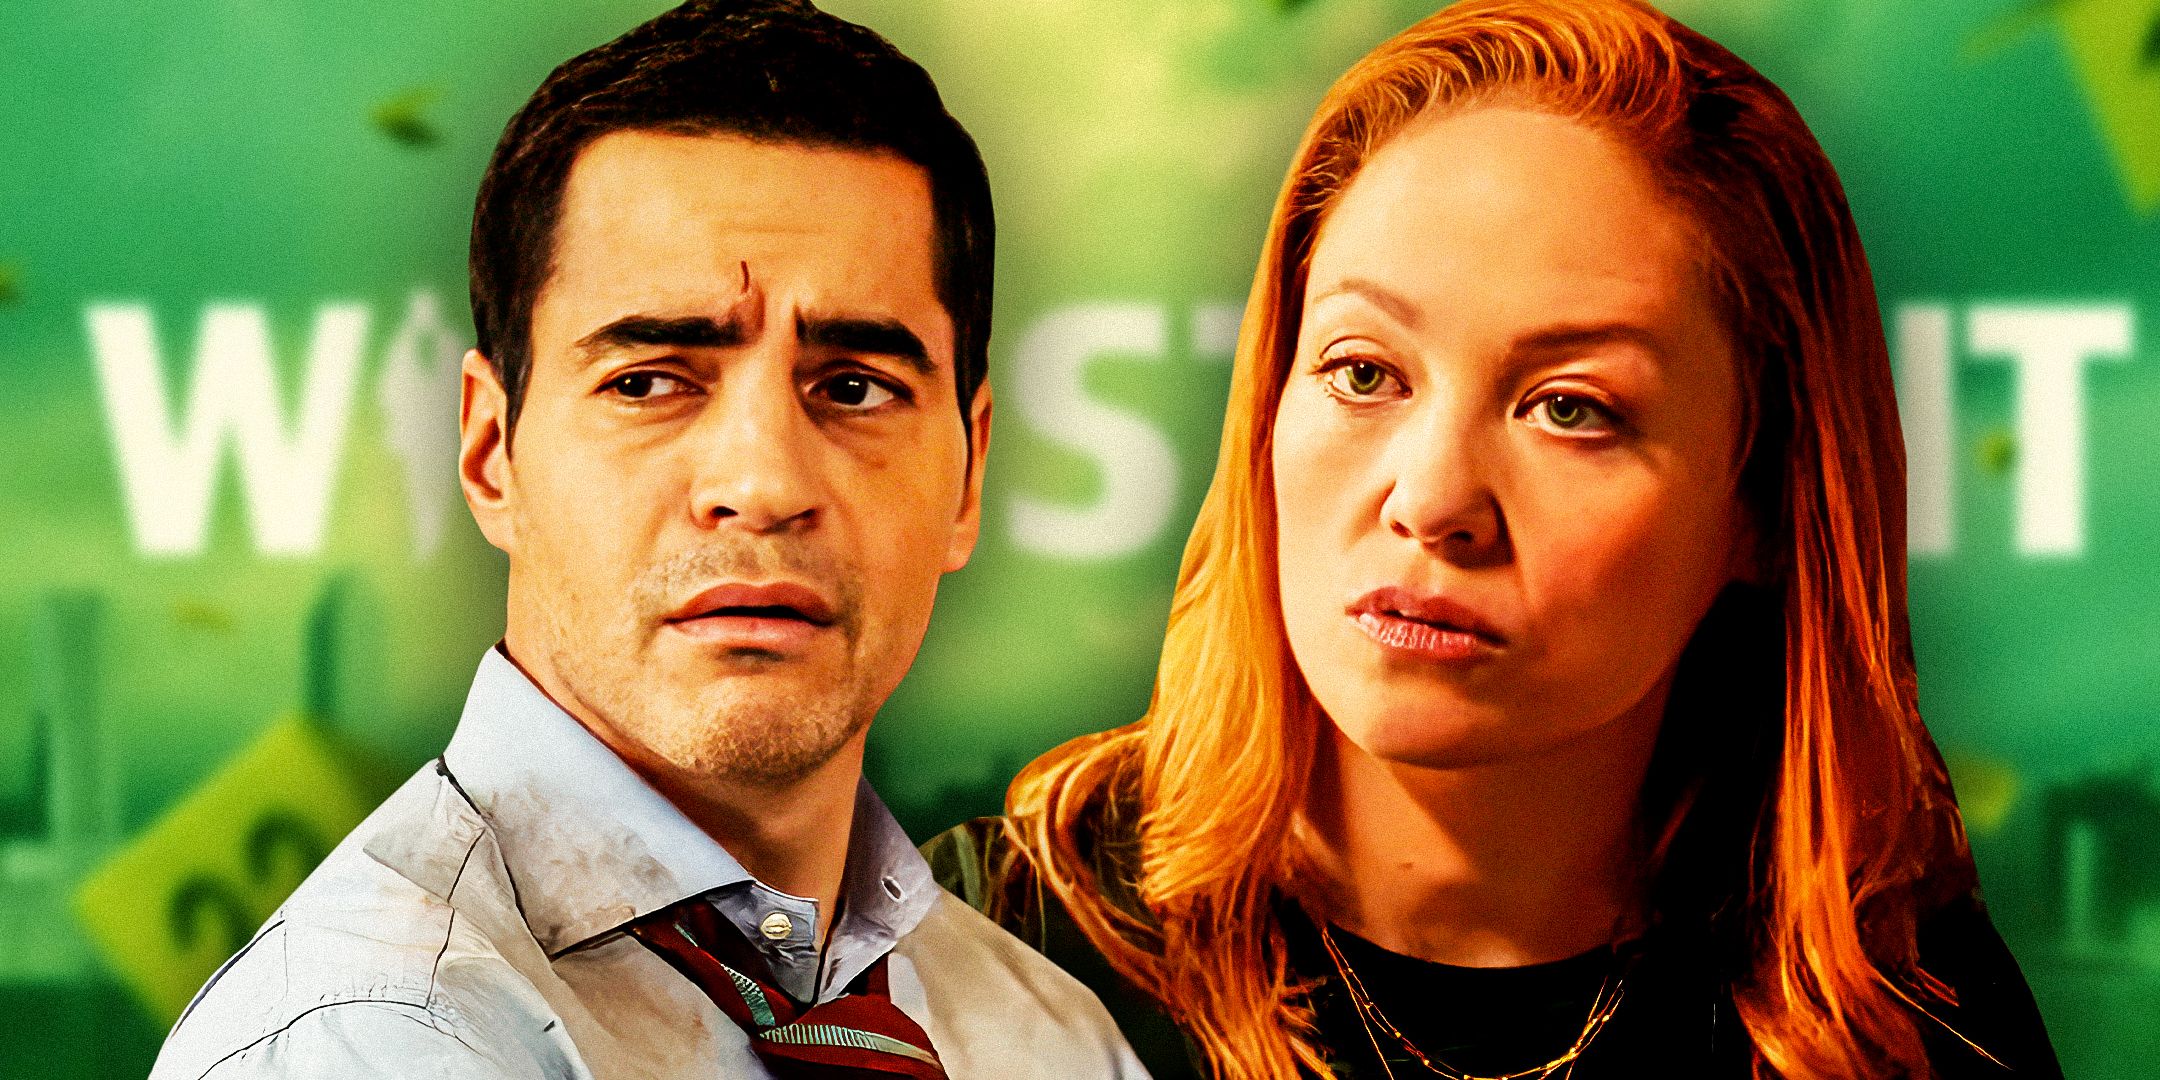 Ramón Rodríguez as Will Trent and Erika Christensen as Angie Polaski in Will Trent.